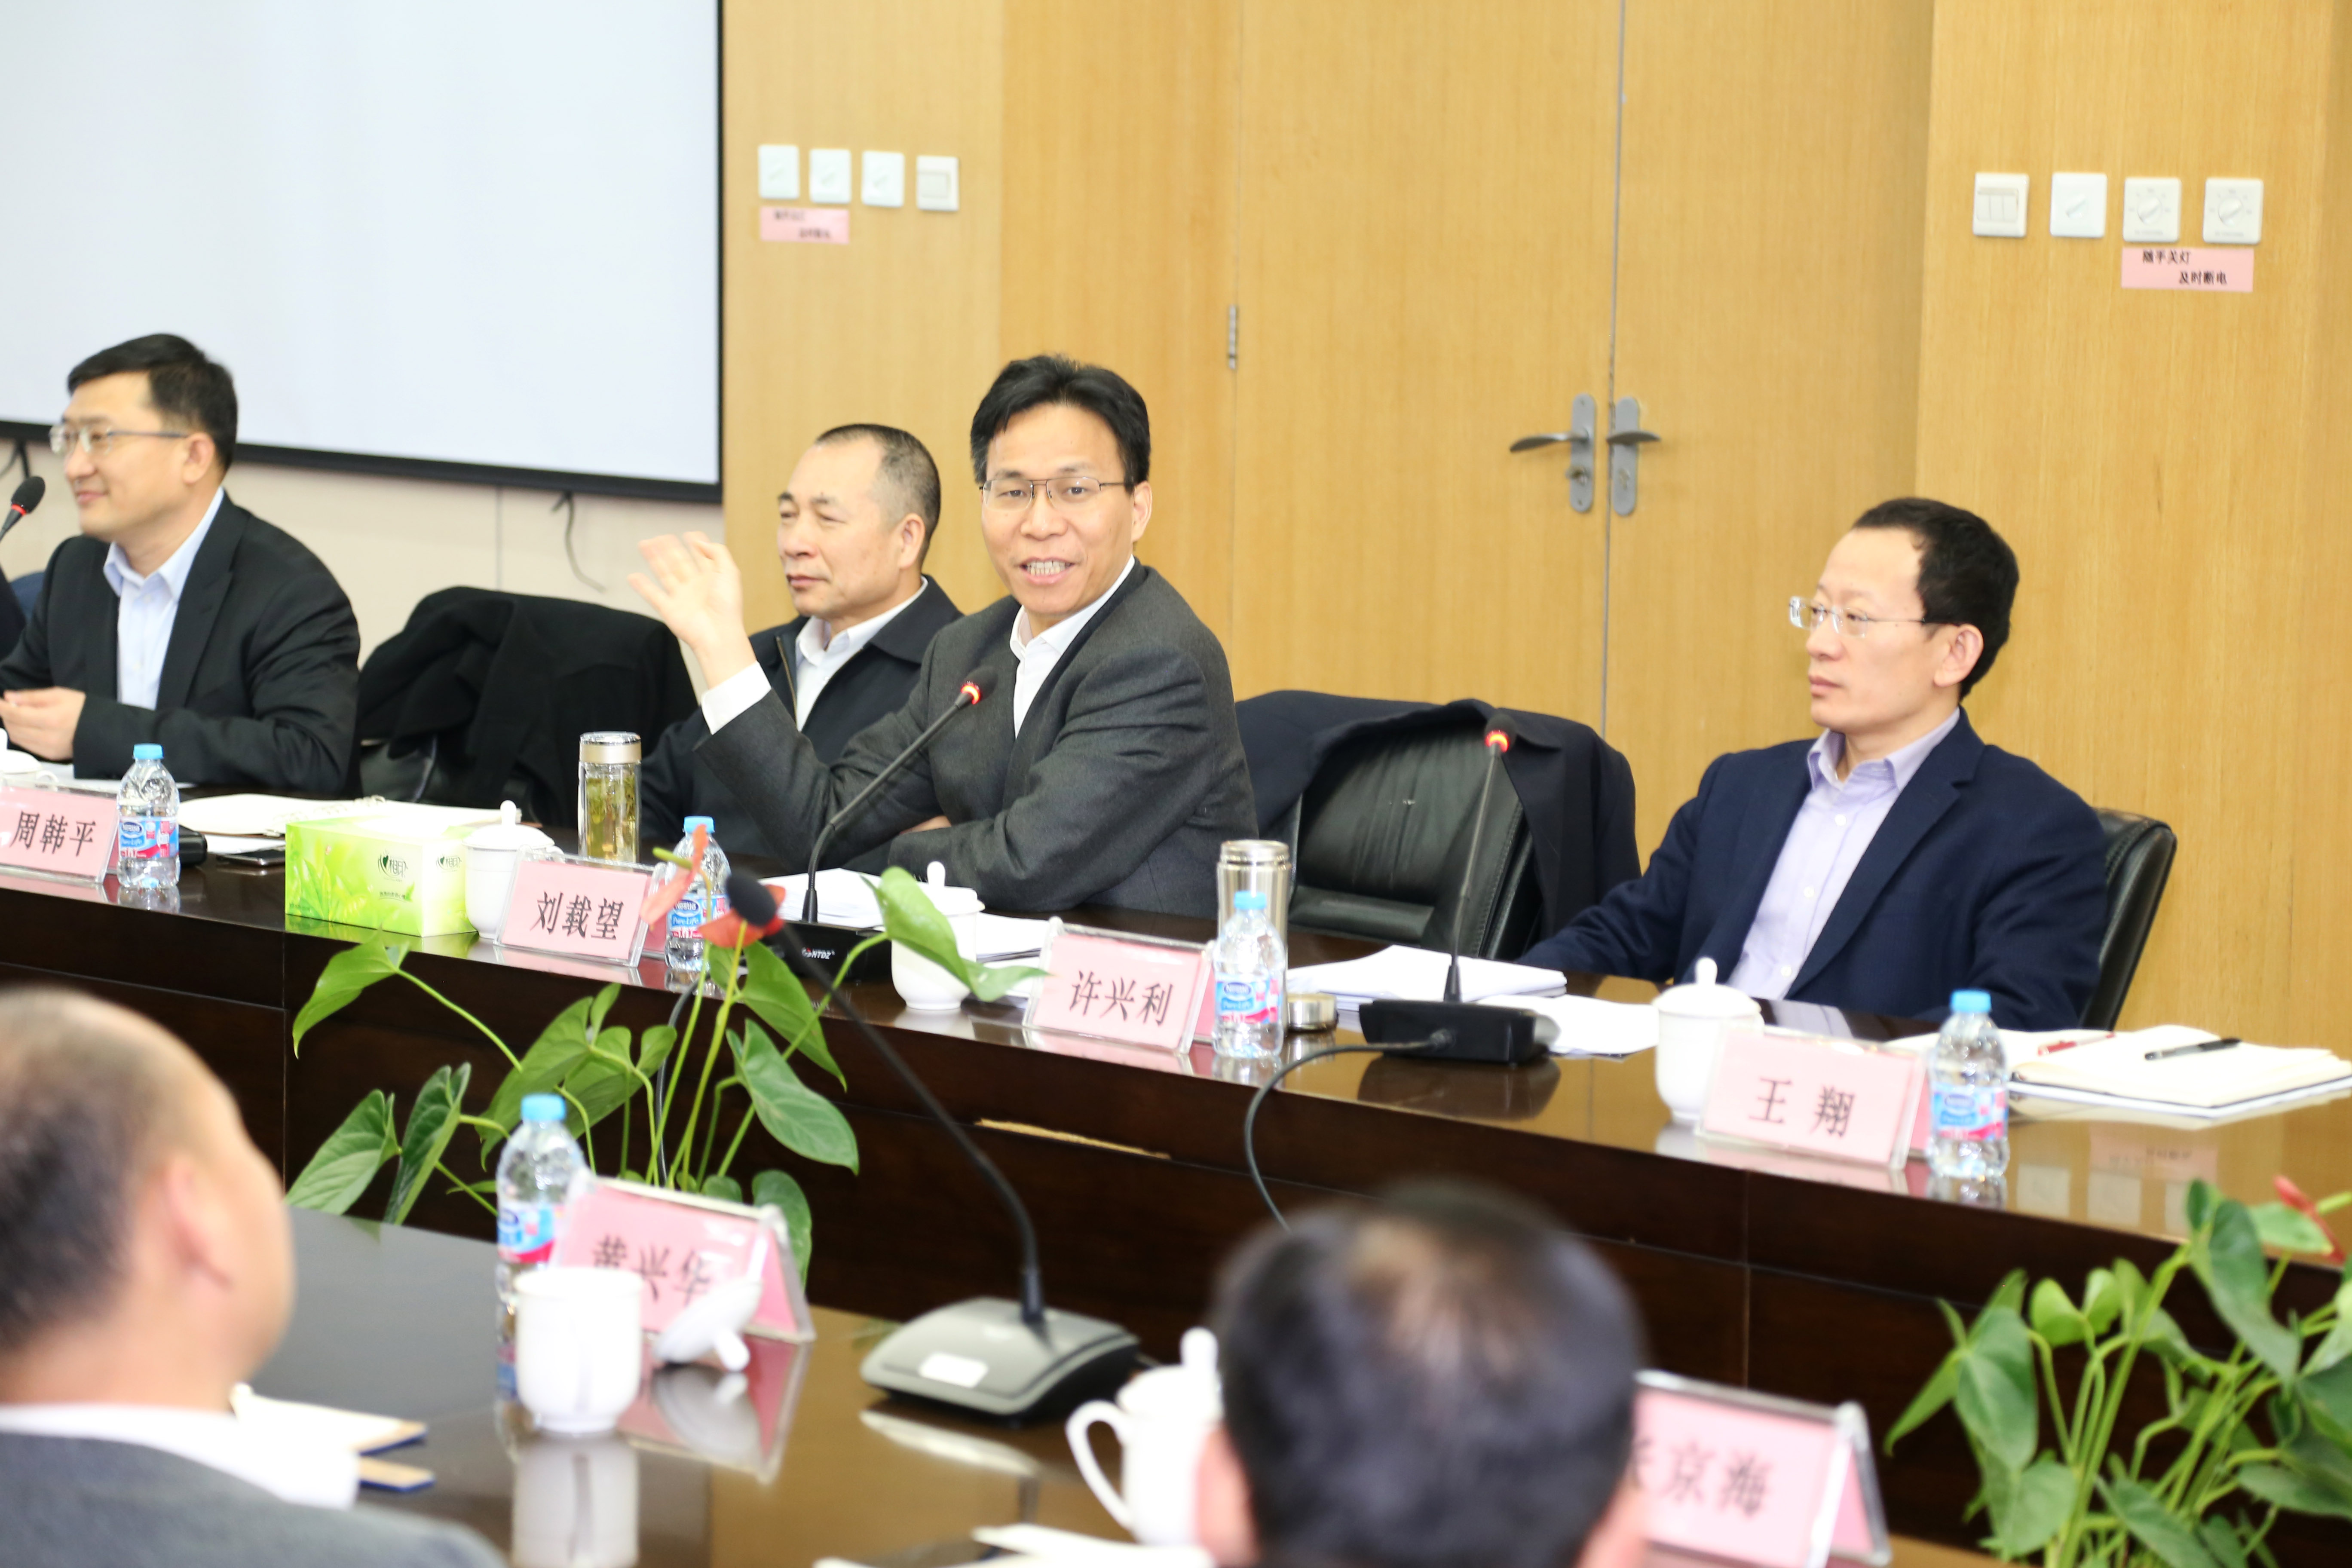 Go beyond What’s Expected and Succeed with Assurance —— Jangho Held Its “10.1” Work Meeting Successfully